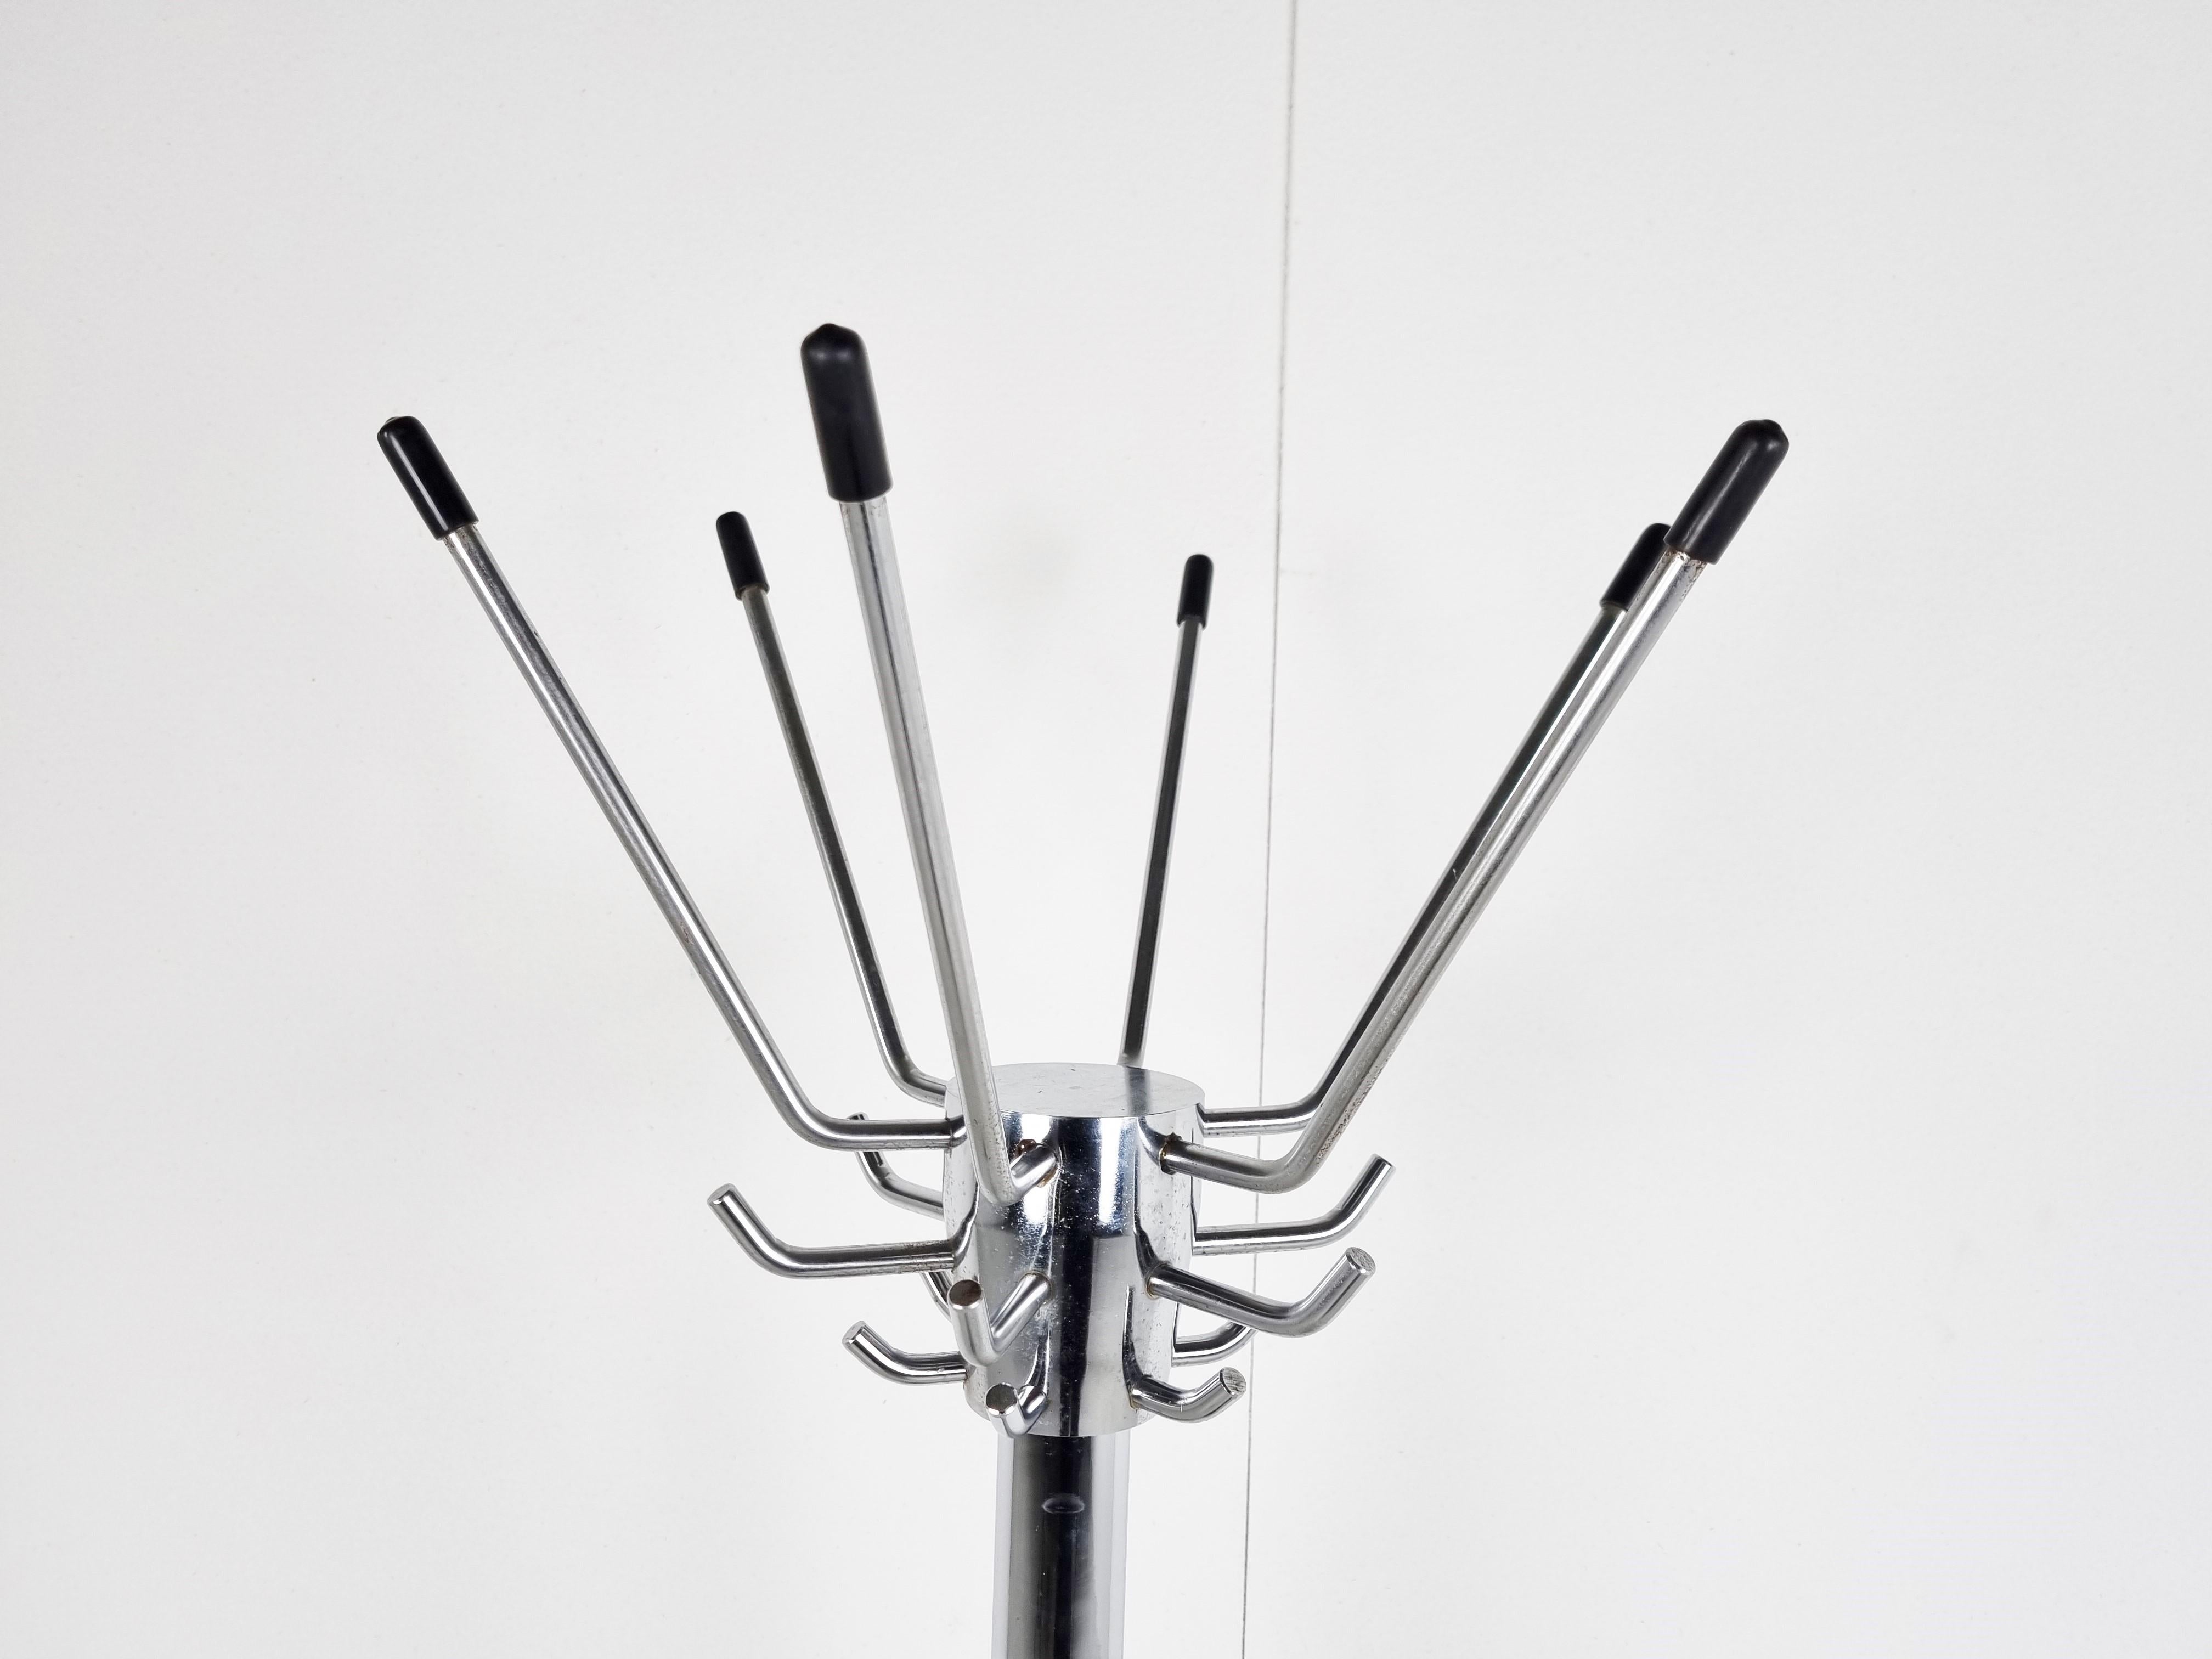 Mid century standing coat hook with umbrella holder designed by Jacques Adnet.

Gorgeous modernist design from the 1950s.

1950s - France

Good condition with minor wear.

Dimensions:
Height: 182cm/71.65